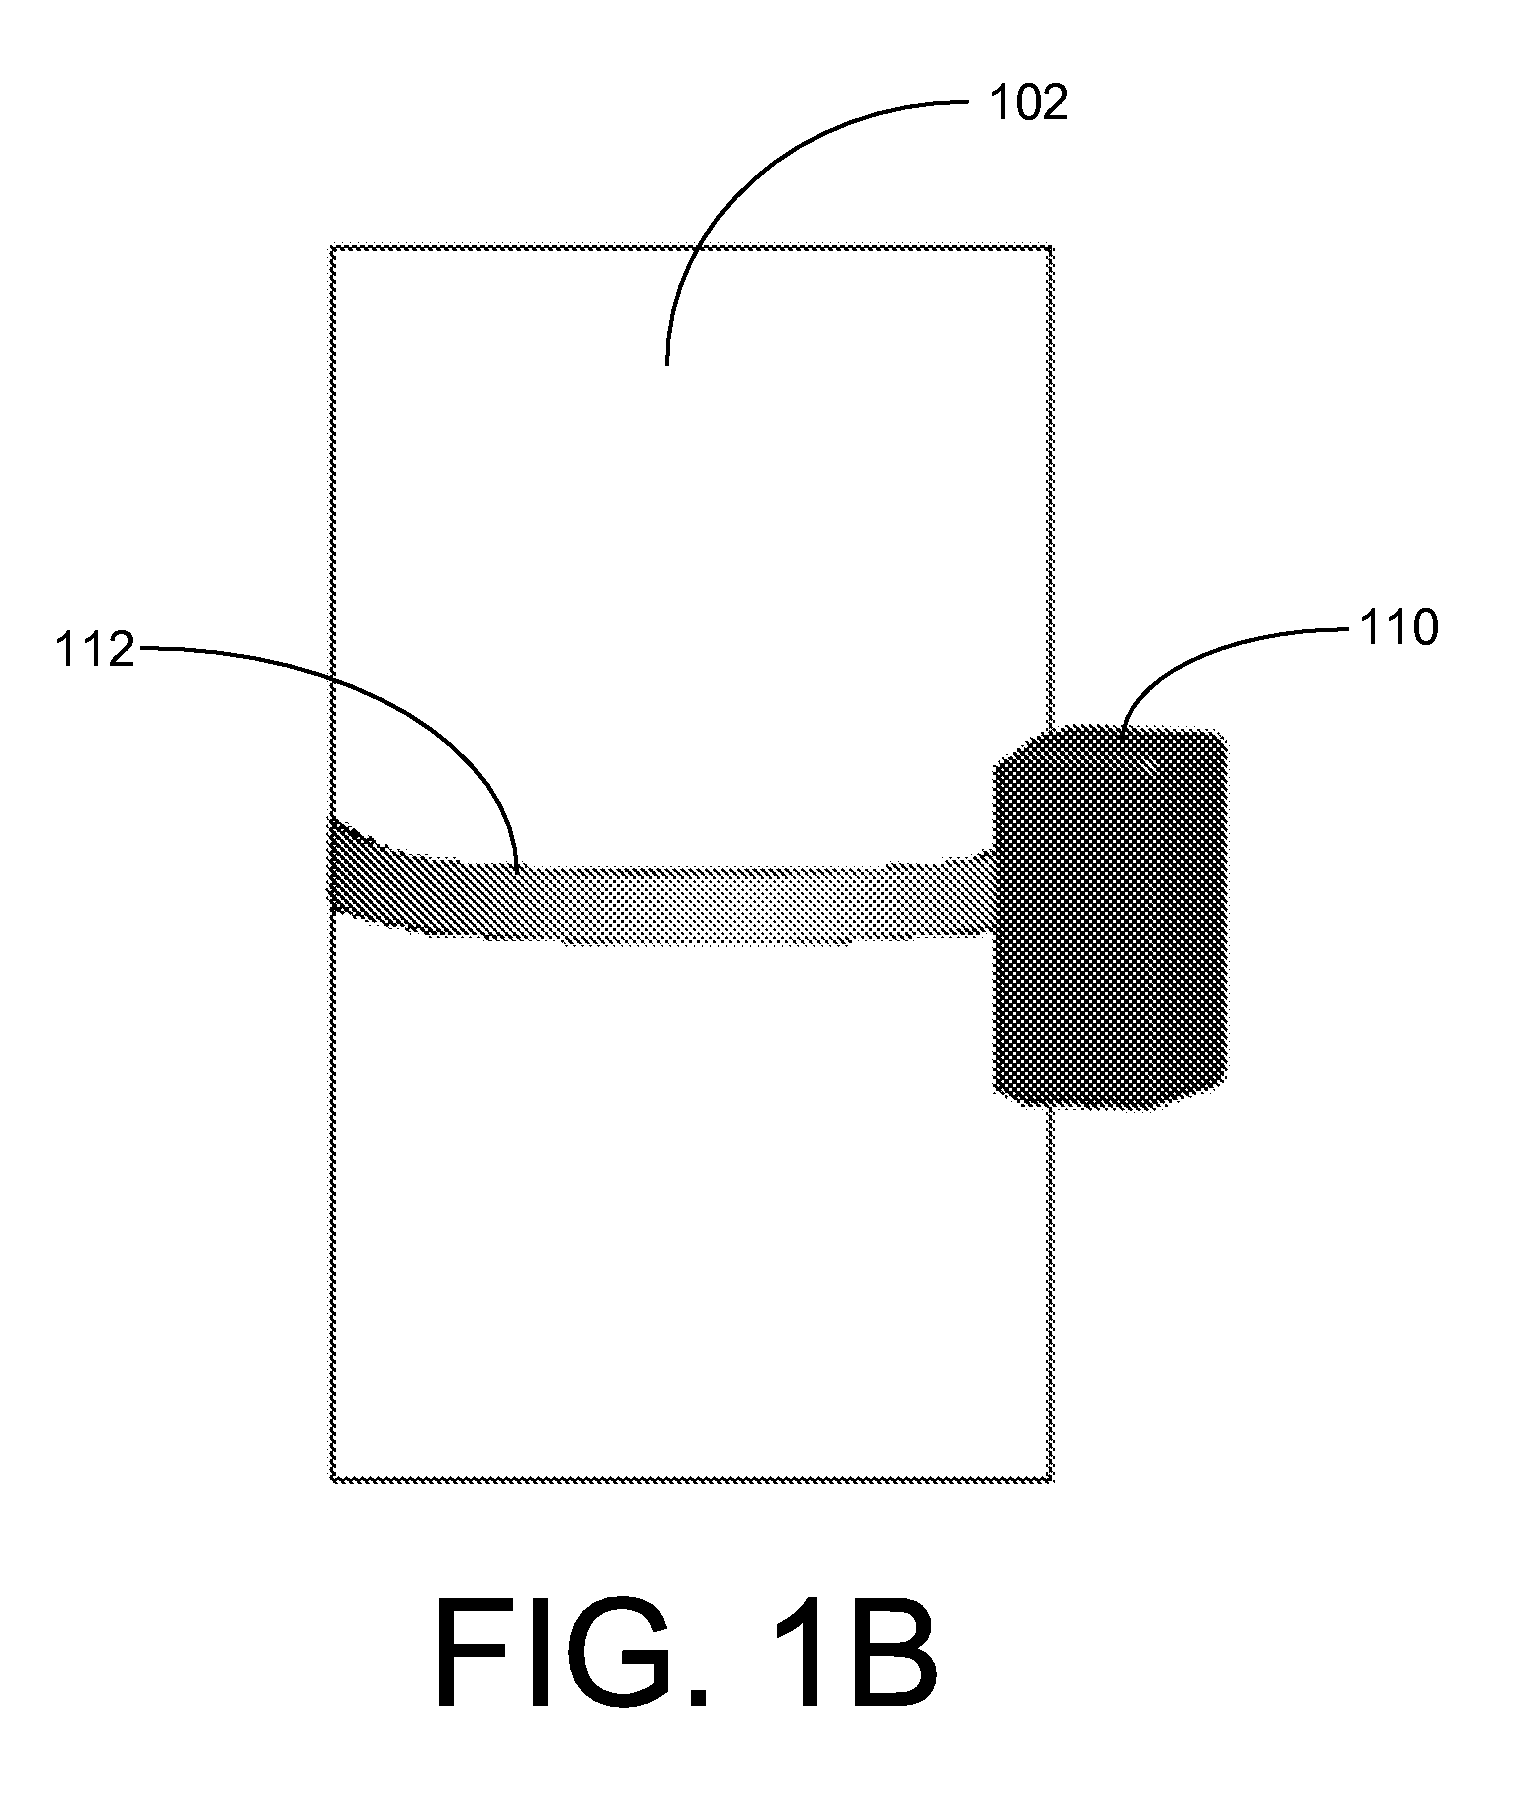 Systems, methods, and apparatuses for stray voltage detection